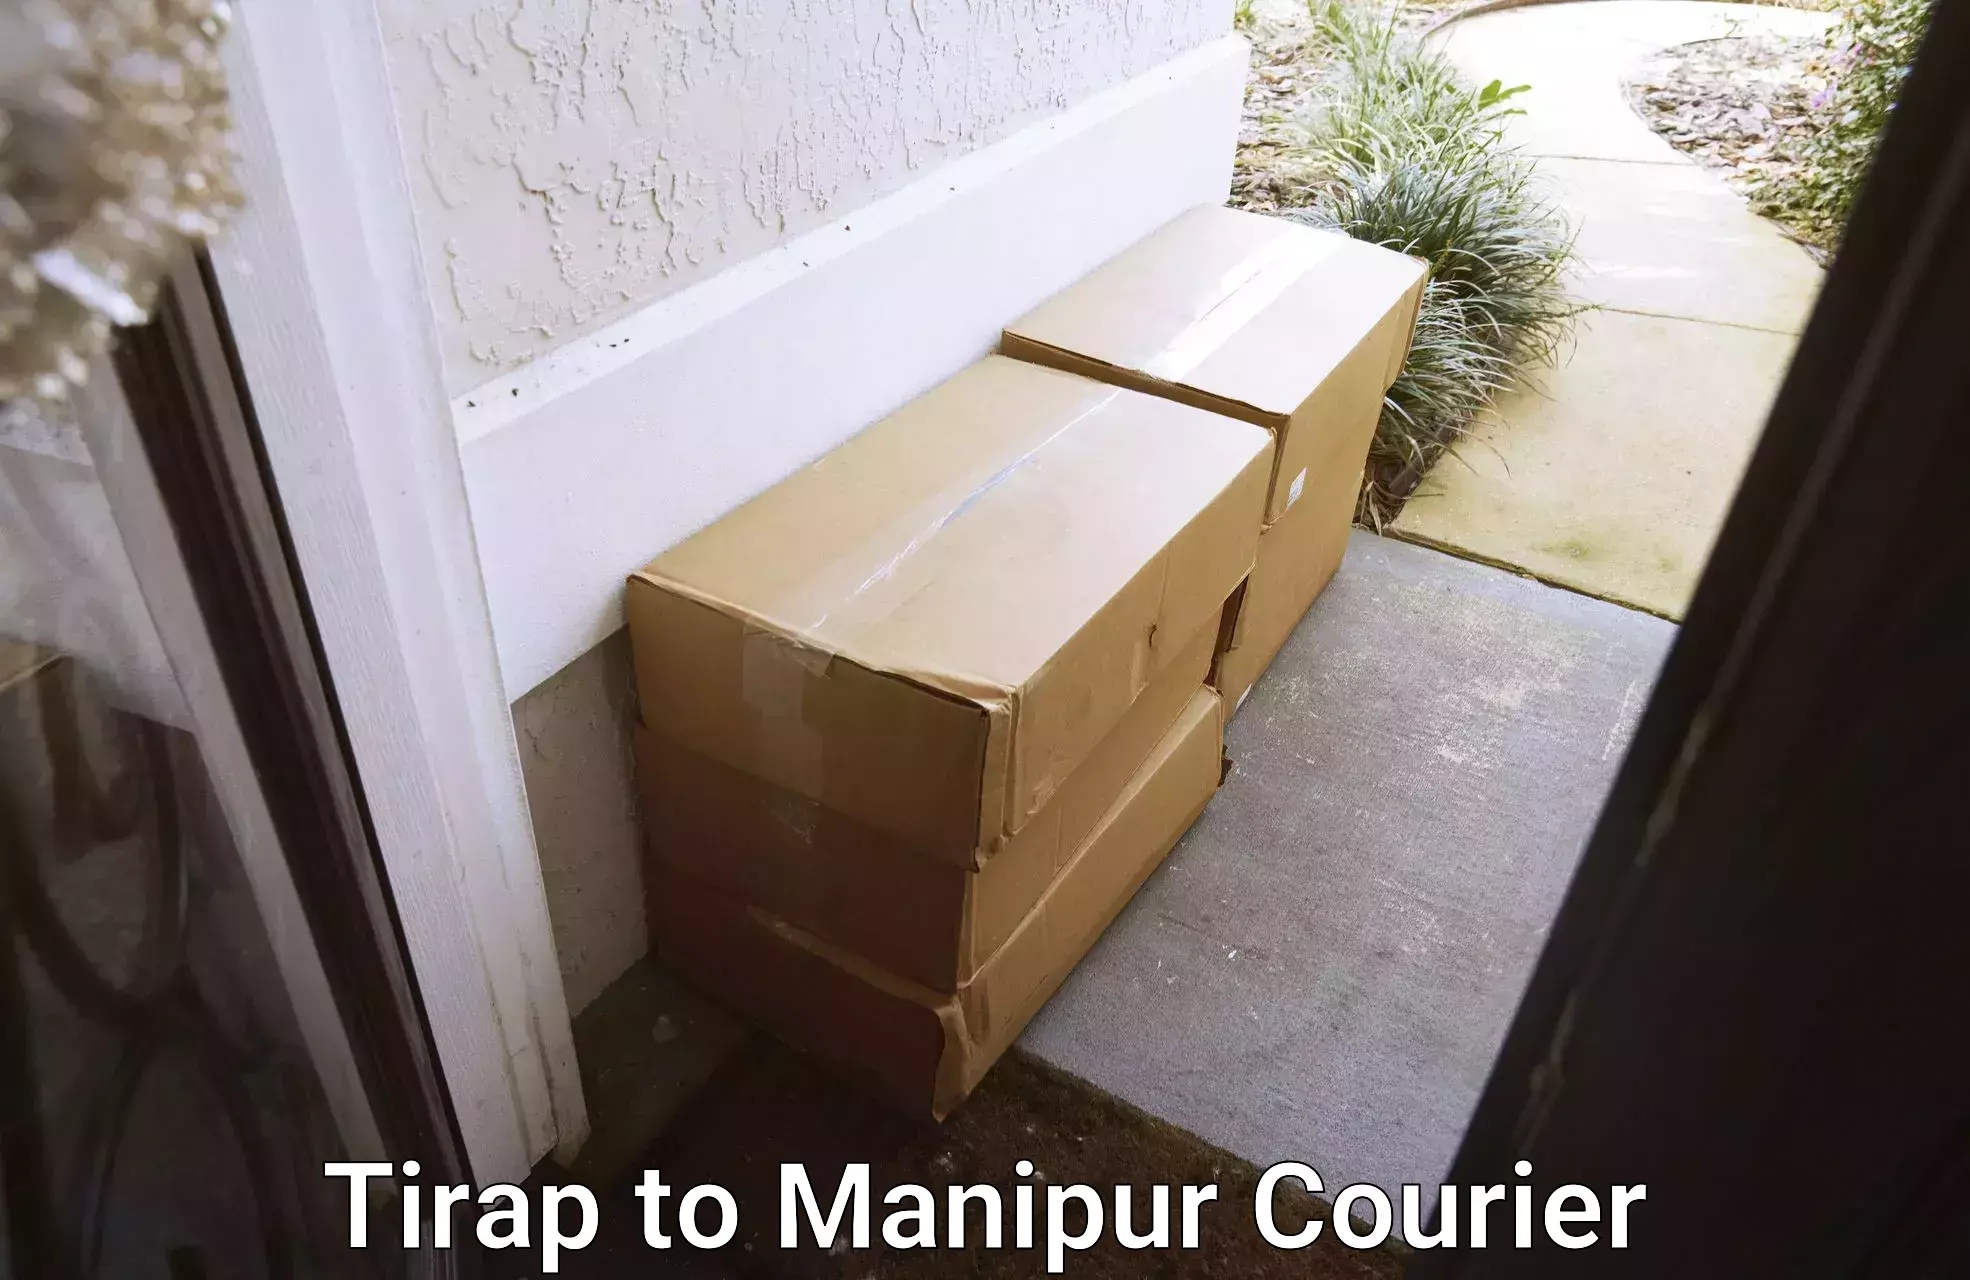 Tech-enabled shipping Tirap to Manipur